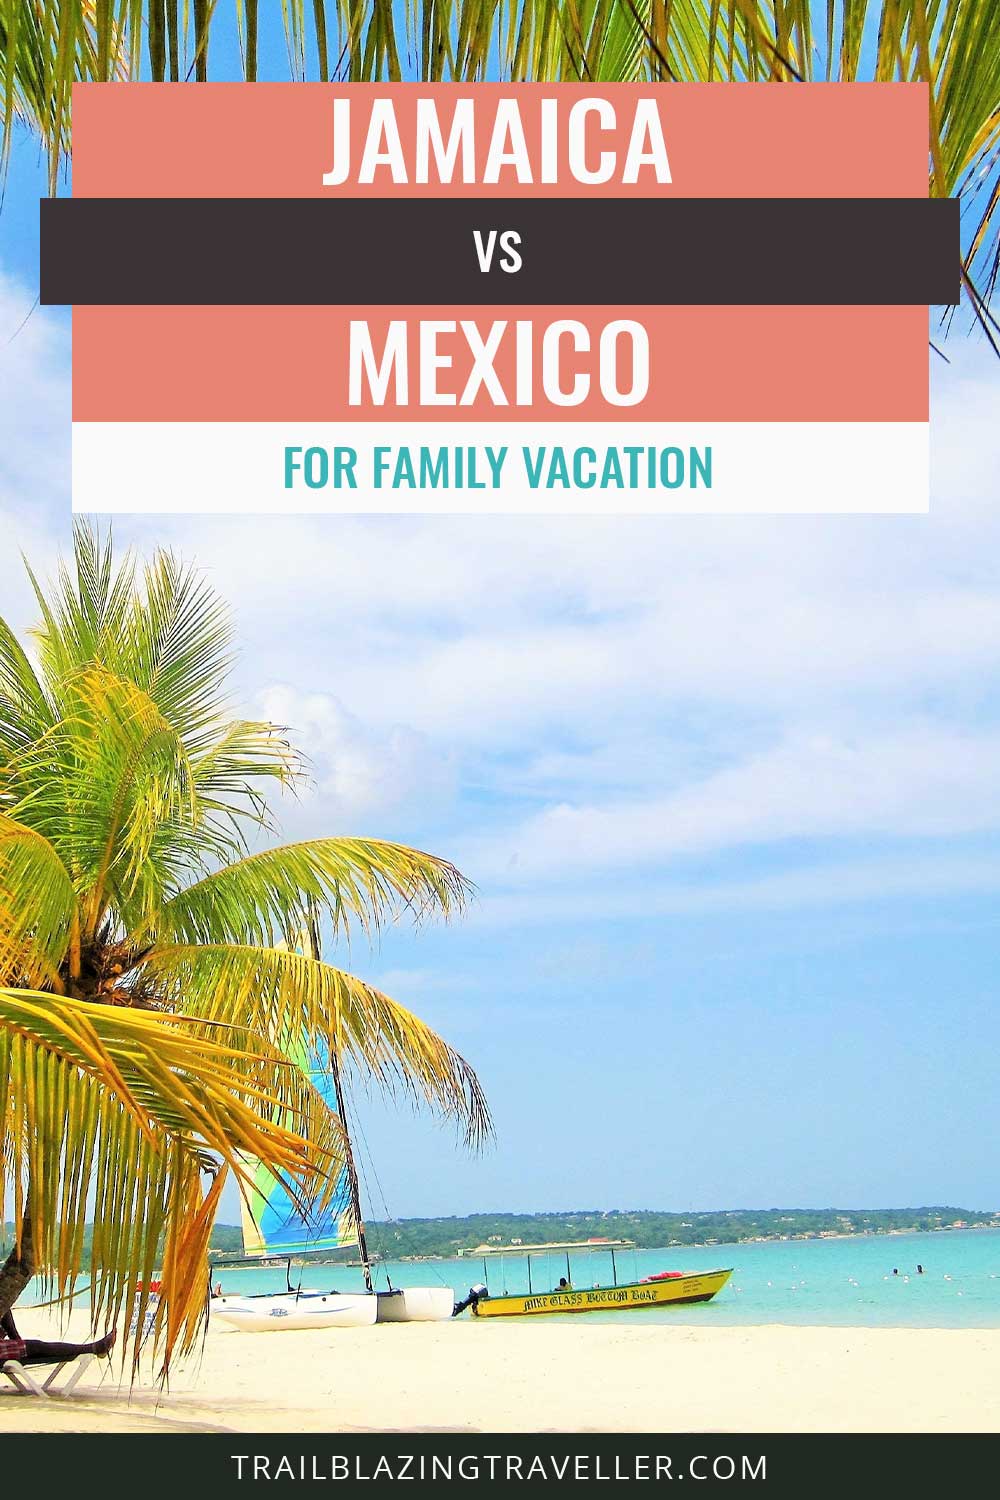 A beach with a coconut tree on it - Jamaica vs. Mexico for Family Vacation.